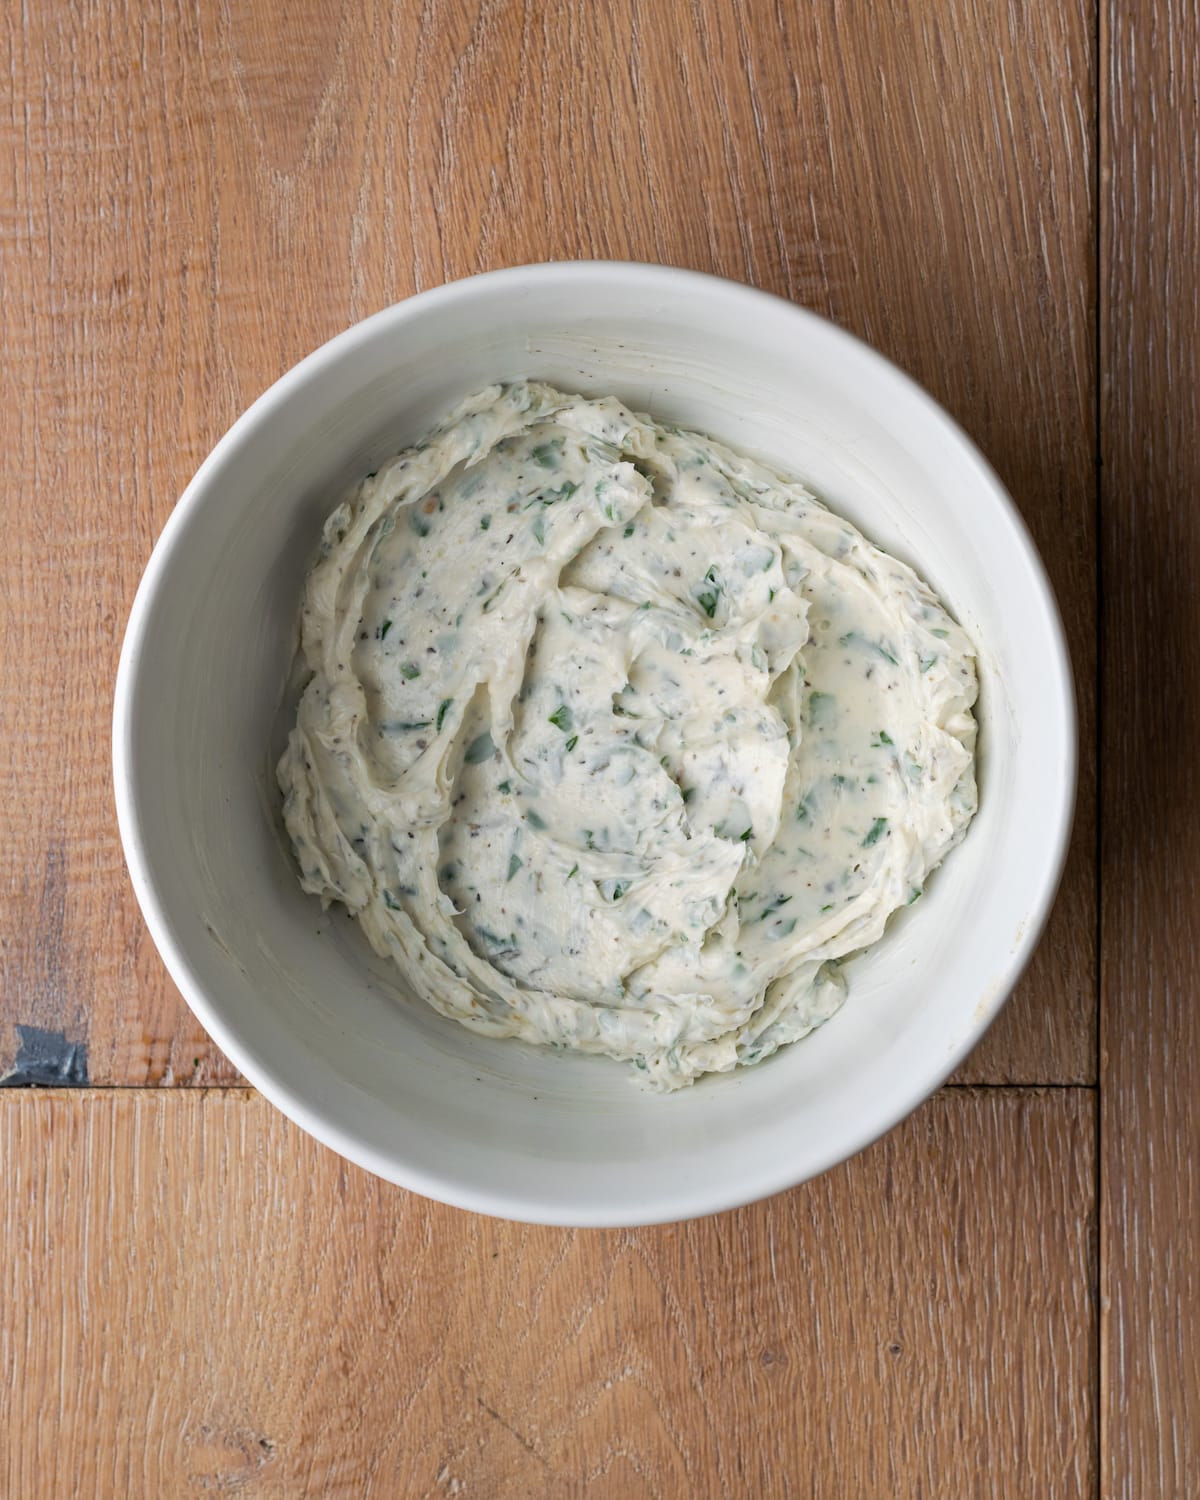 Top view of herb butter in a white bowl.